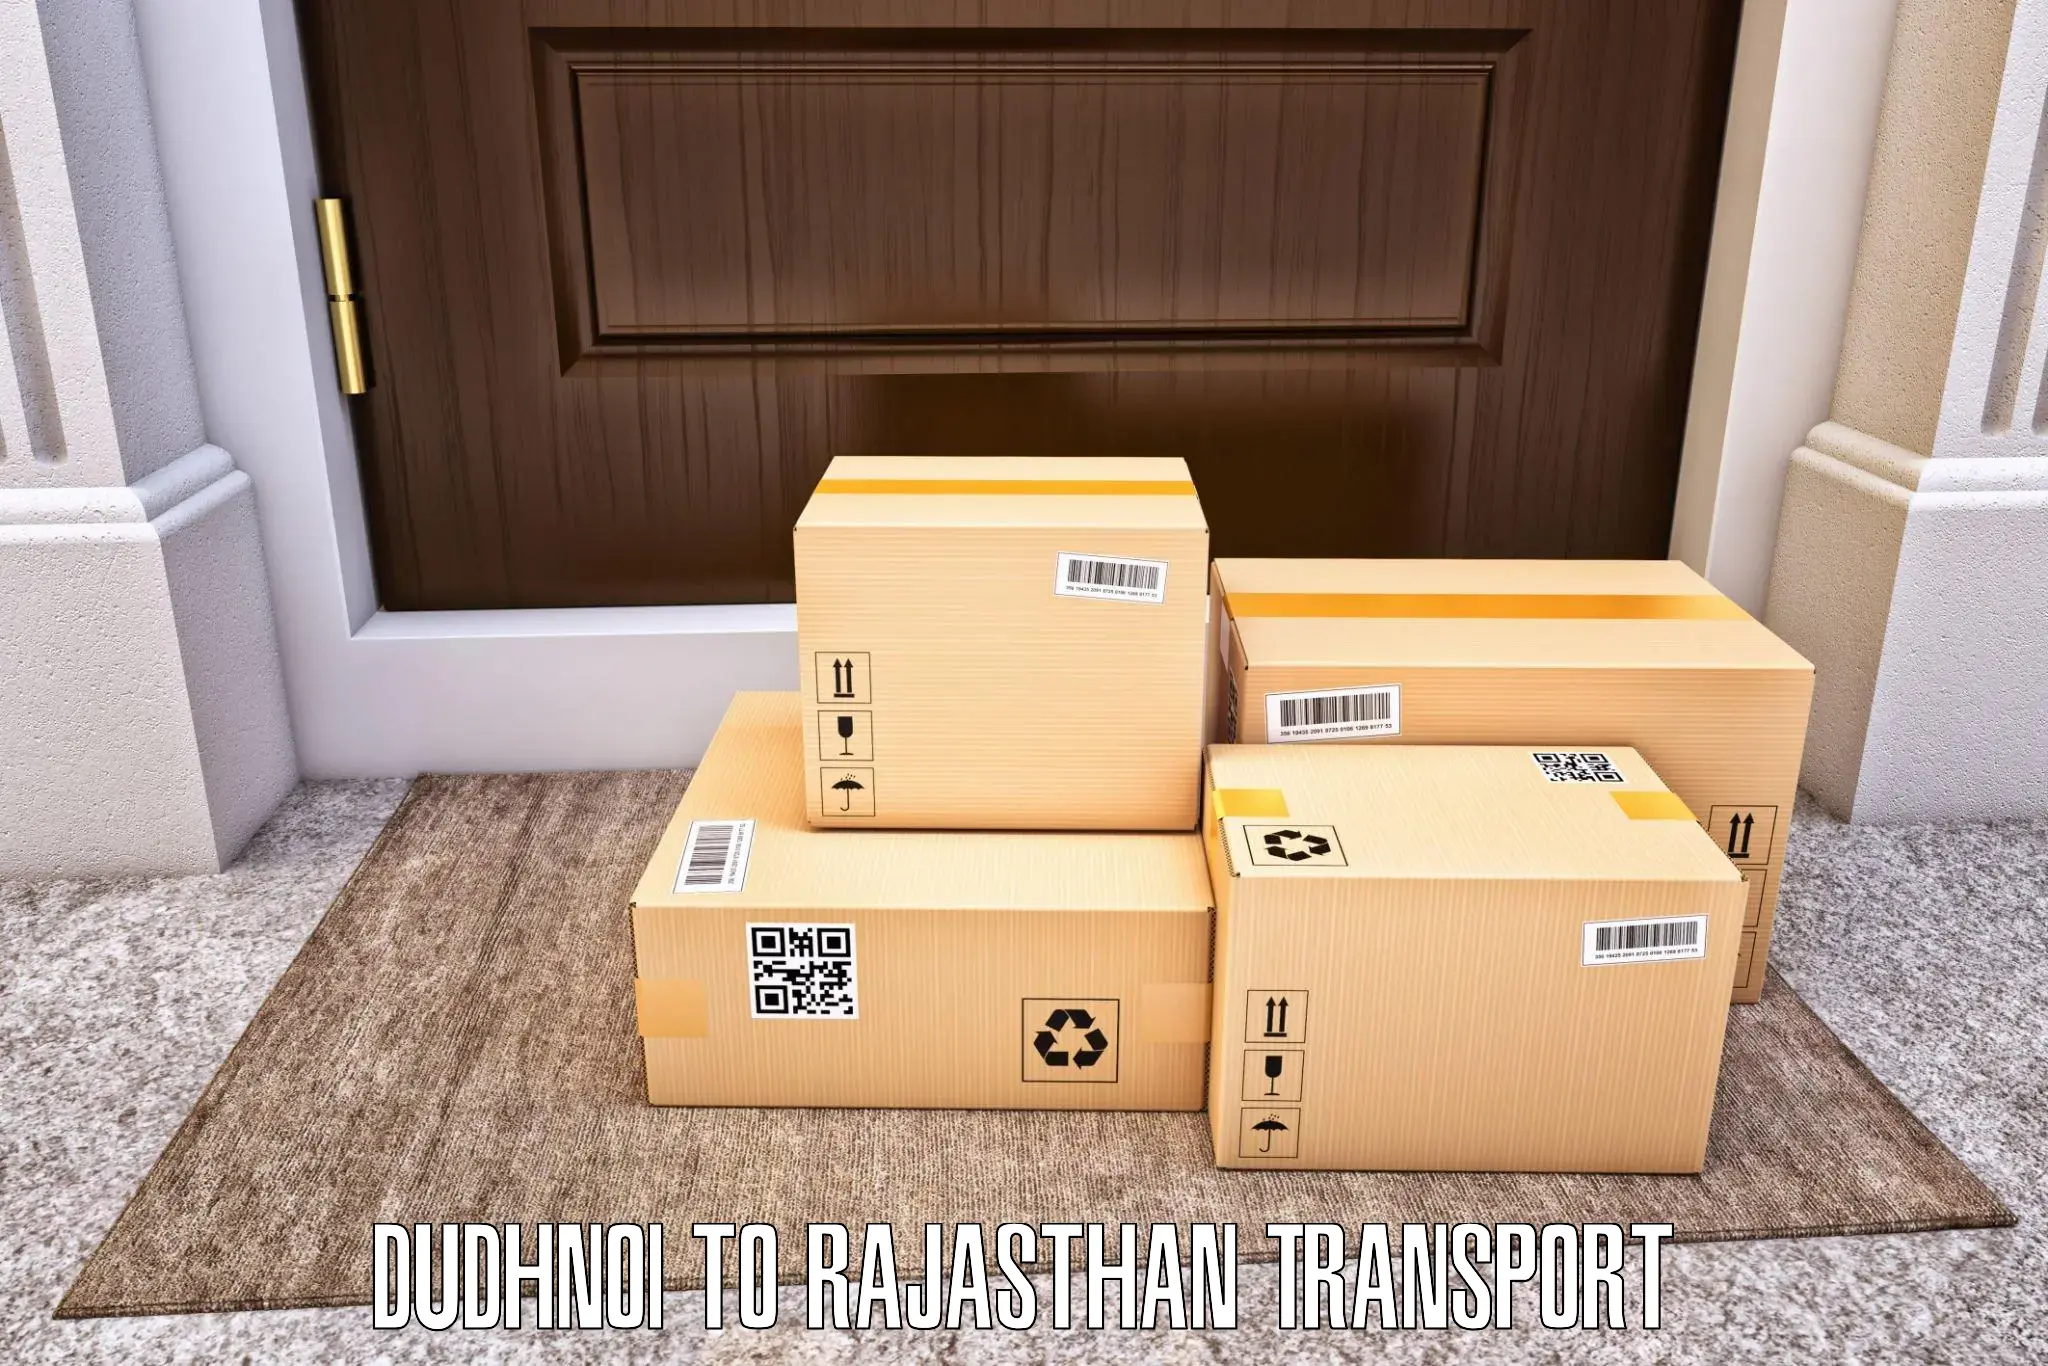 Part load transport service in India Dudhnoi to Kuchaman